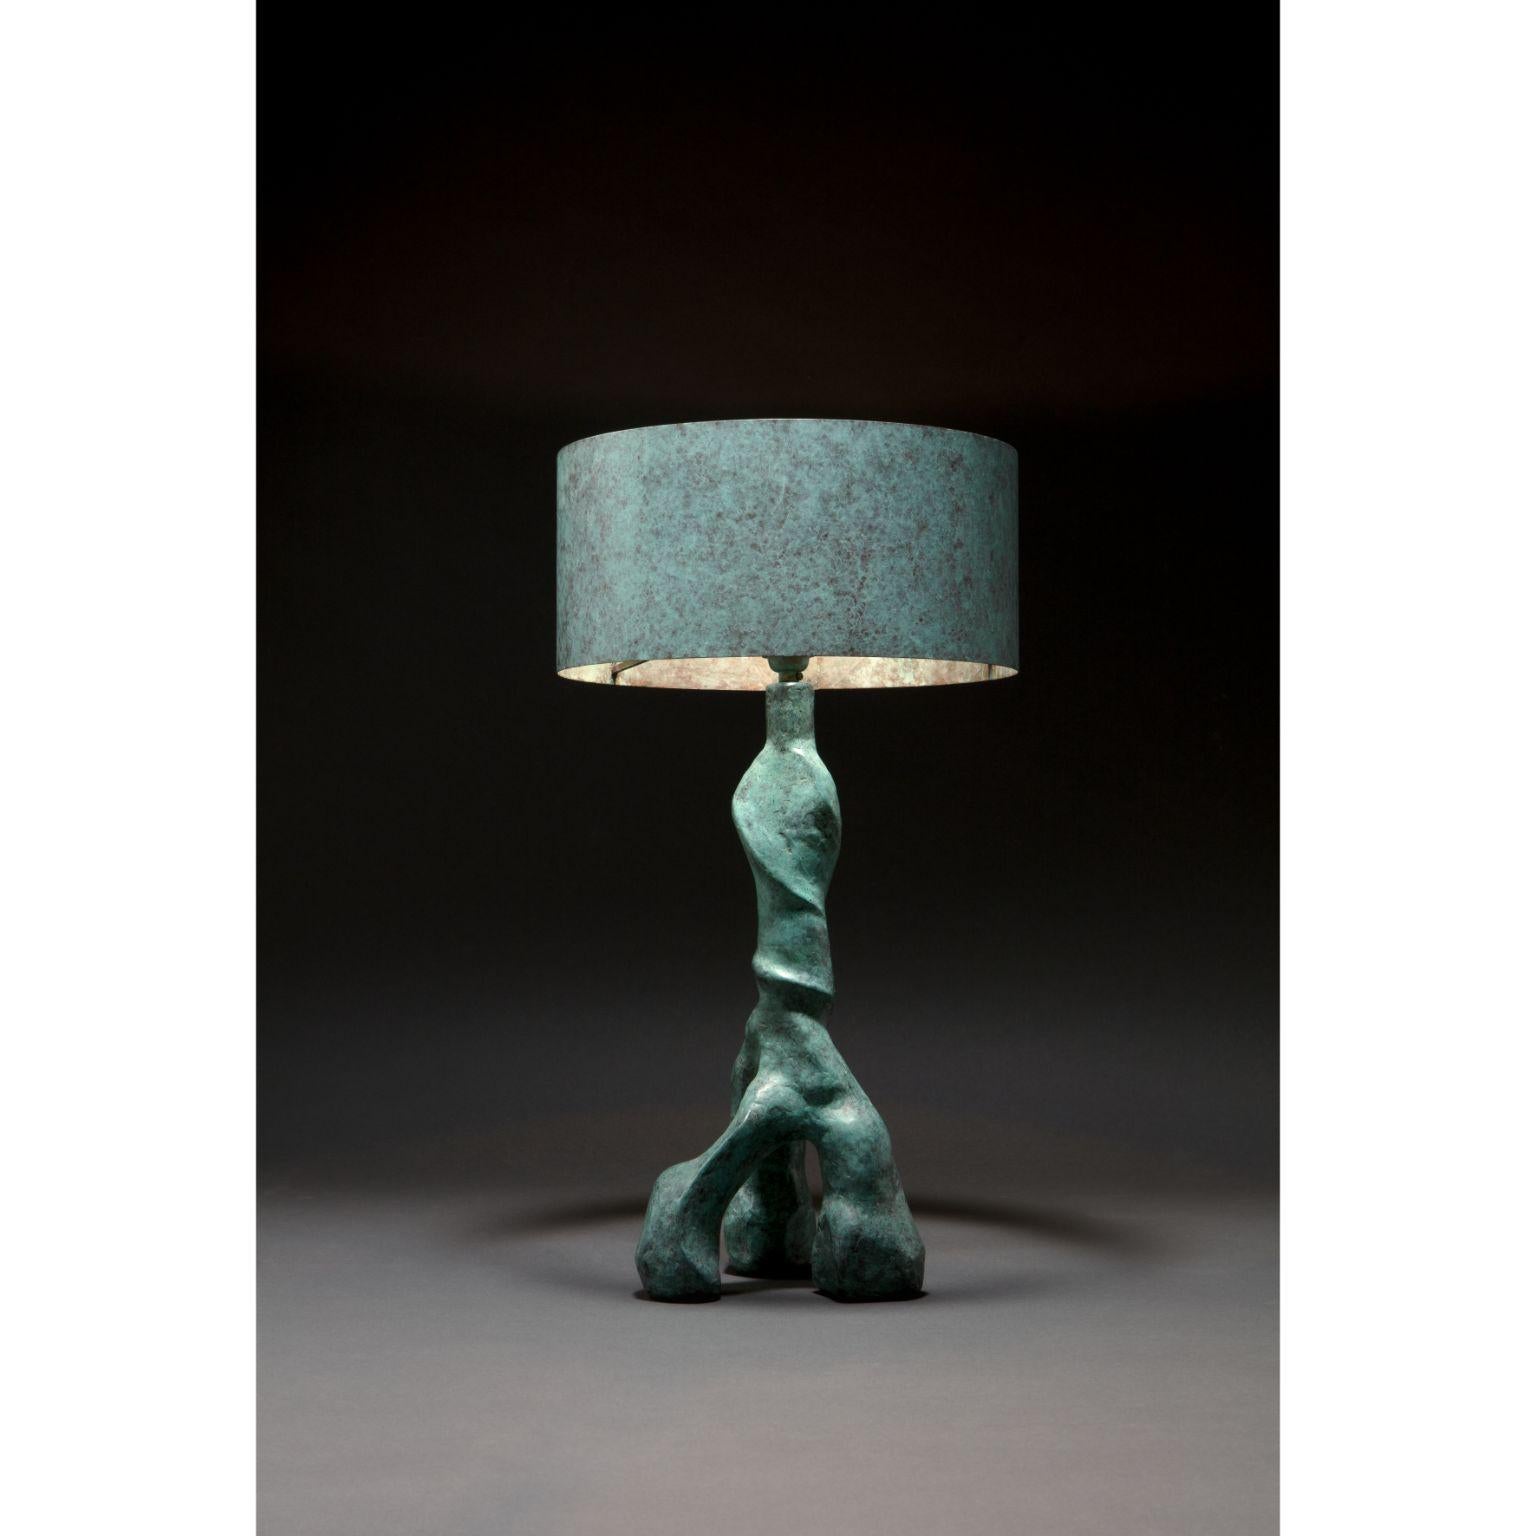 Henry table lamp by Pierre-Axel Coulibeuf
2019
Edition of 20 + 4AP
Dimensions: W 32 x D 32 x H 55 cm
Materials: Cast bronze, brass, patina

Wiring. Can be EU, UK or US (UL Listed), specified at order.

Growing up in France, with a